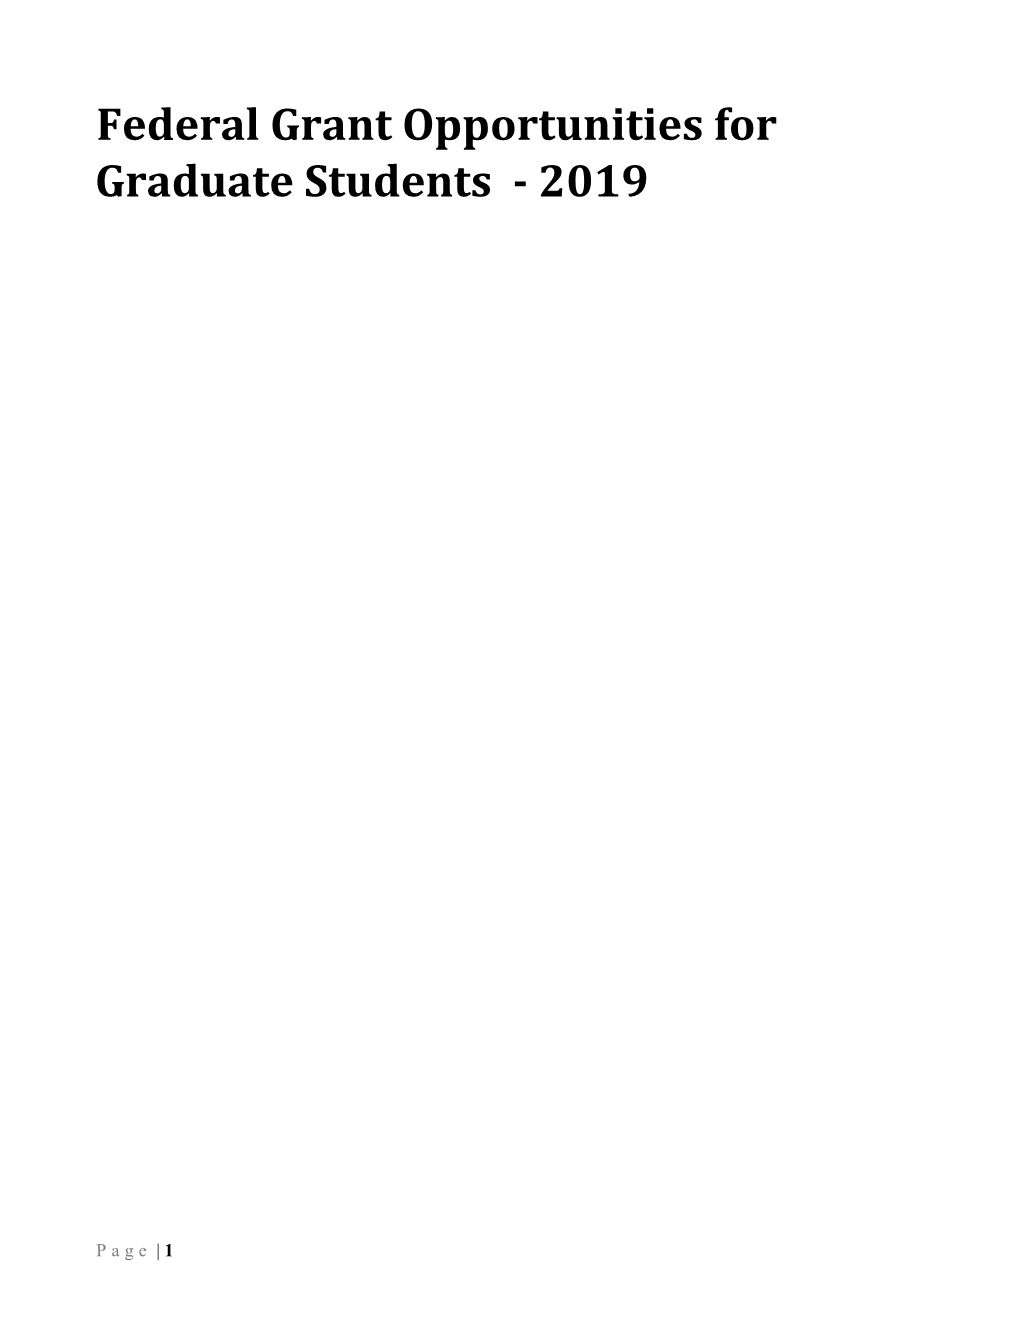 Federal Grant Opportunities for Graduate Students ‐ 2019